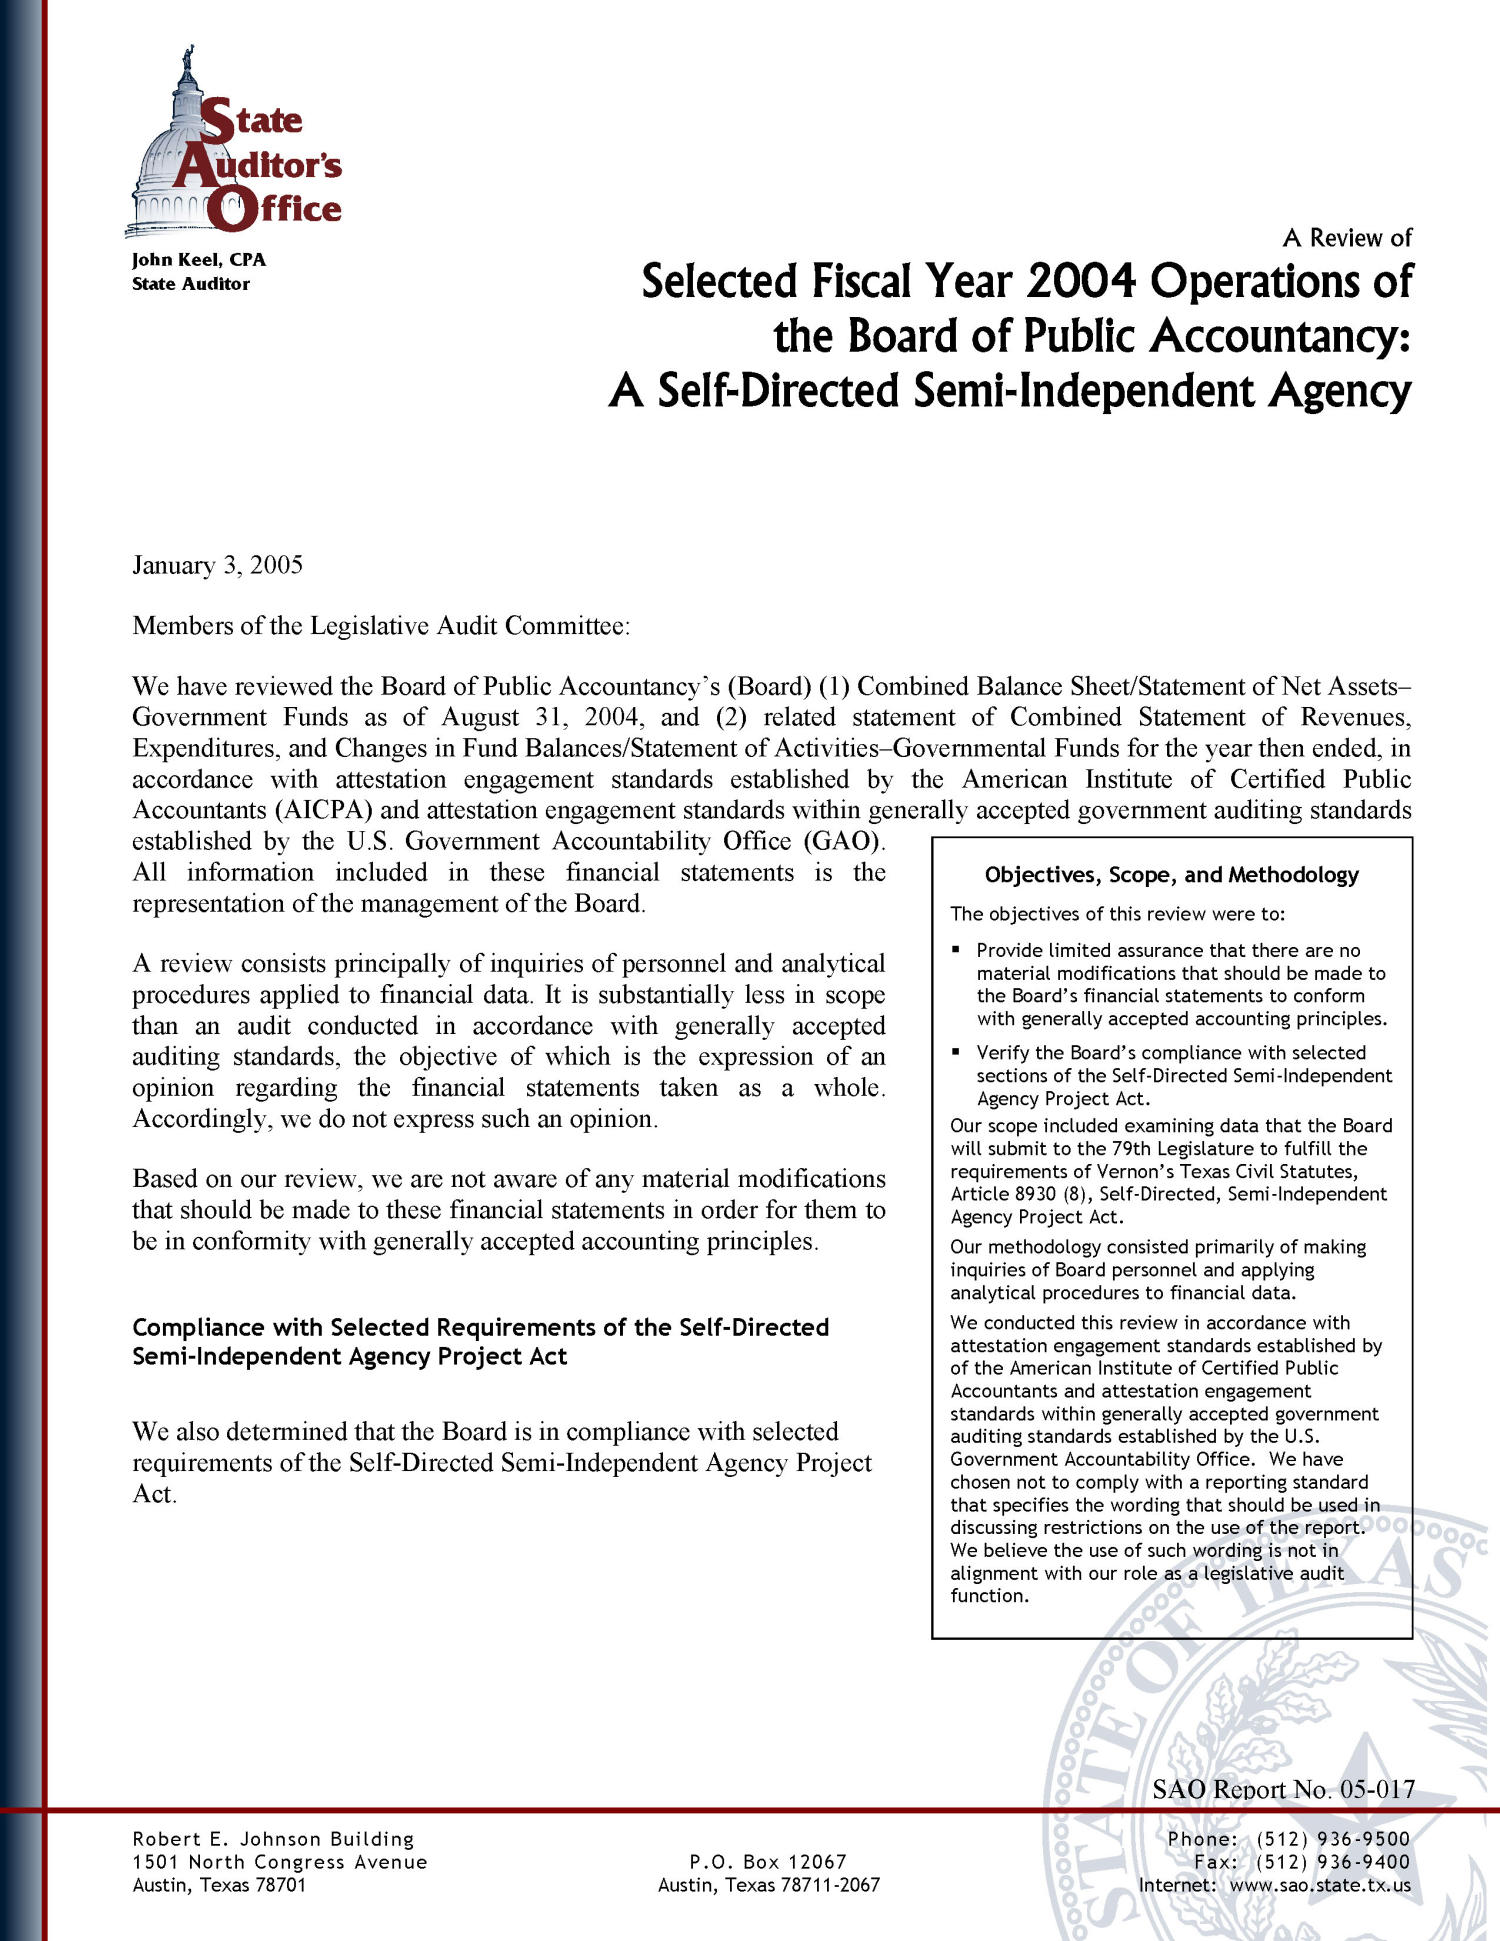 A Review of Selected Fiscal Year 2004 Operations of the Board of Public Accountancy: A Self-Directed Semi-Independent Agency
                                                
                                                    [Sequence #]: 1 of 2
                                                